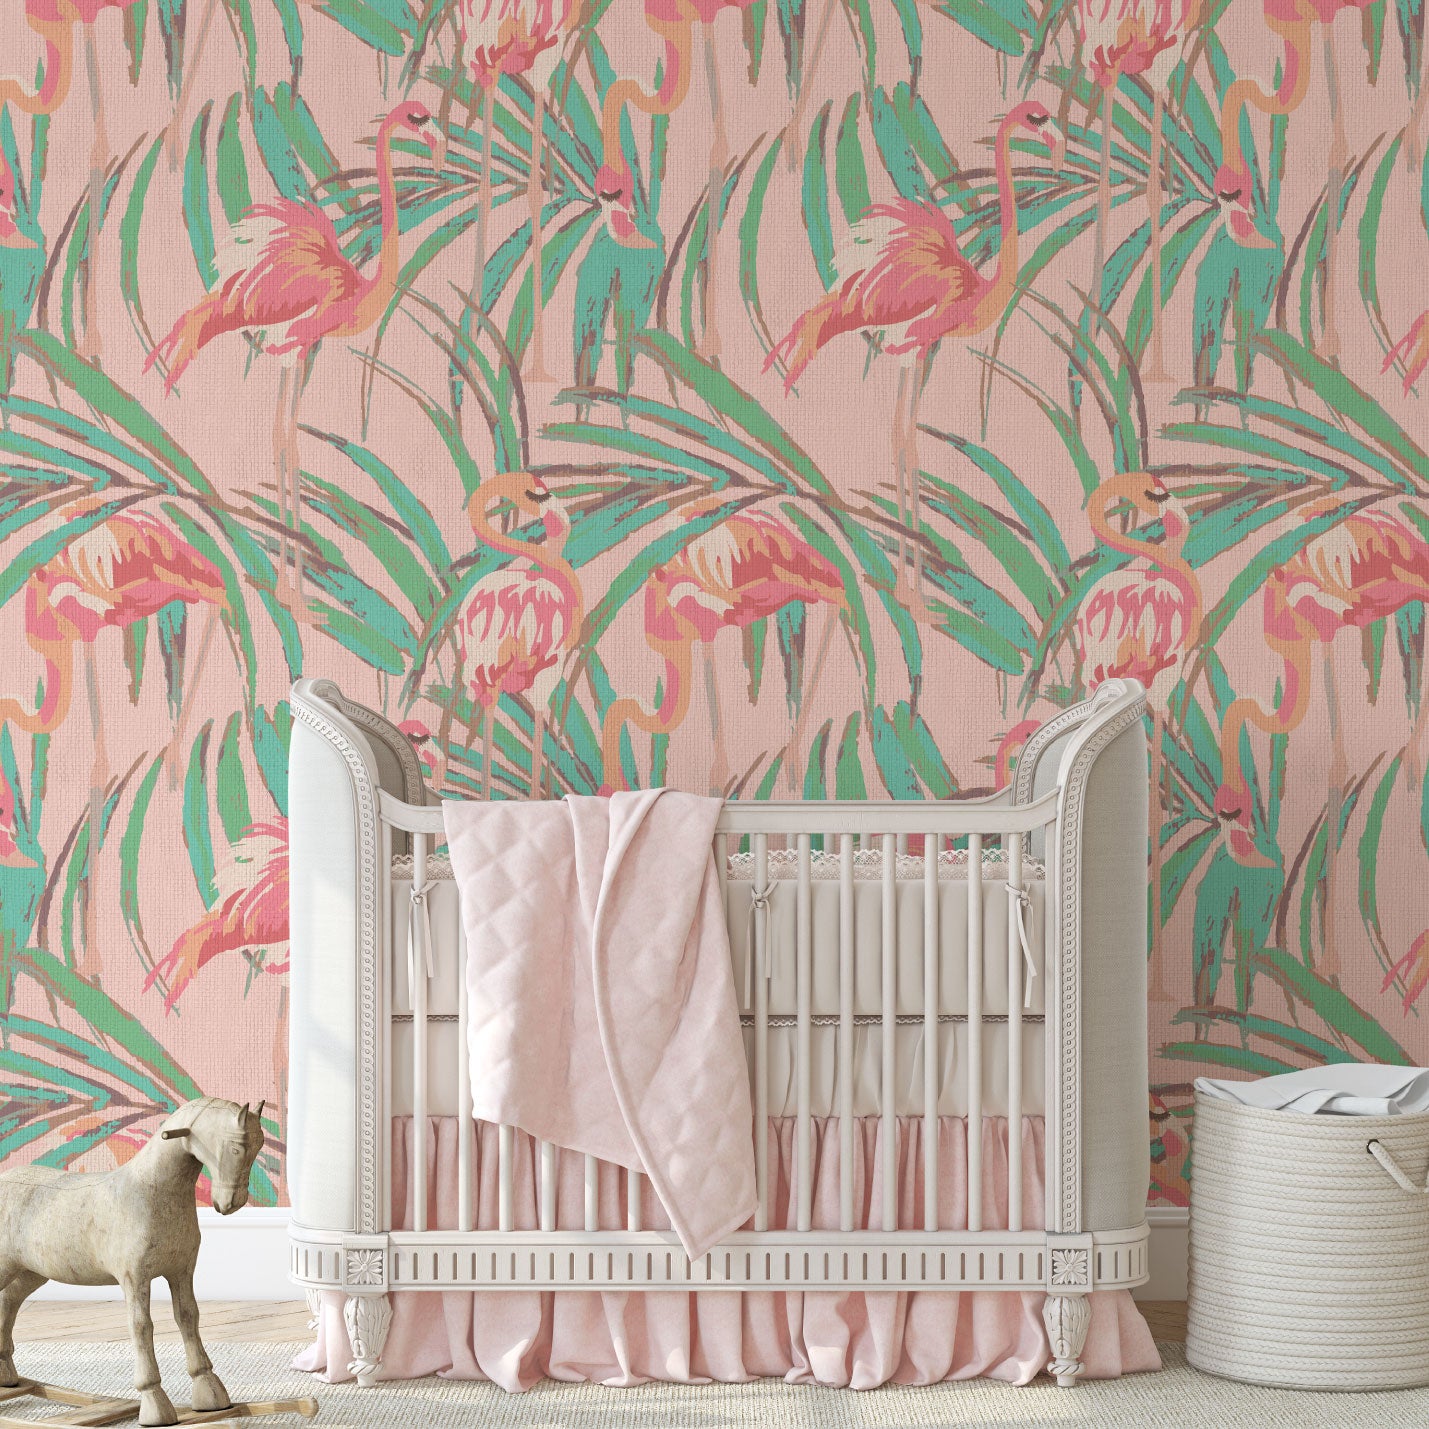 light pink printed paper weave wallpaper with oversized palm leaves layered with extra large flamingos in shades of pink luscious eyelashes brow beauty bar medspa salon Grasscloth Natural Textured Eco-Friendly Non-toxic High-quality Sustainable practices Sustainability Interior Design Wall covering Bold Wallpaper Custom Tailor-made Retro chic Tropical Beauty Hair Garden jungle Seaside Coastal Seashore Waterfront Vacation home styling Retreat Relaxed Beach cottage animal bird palm leaf tree